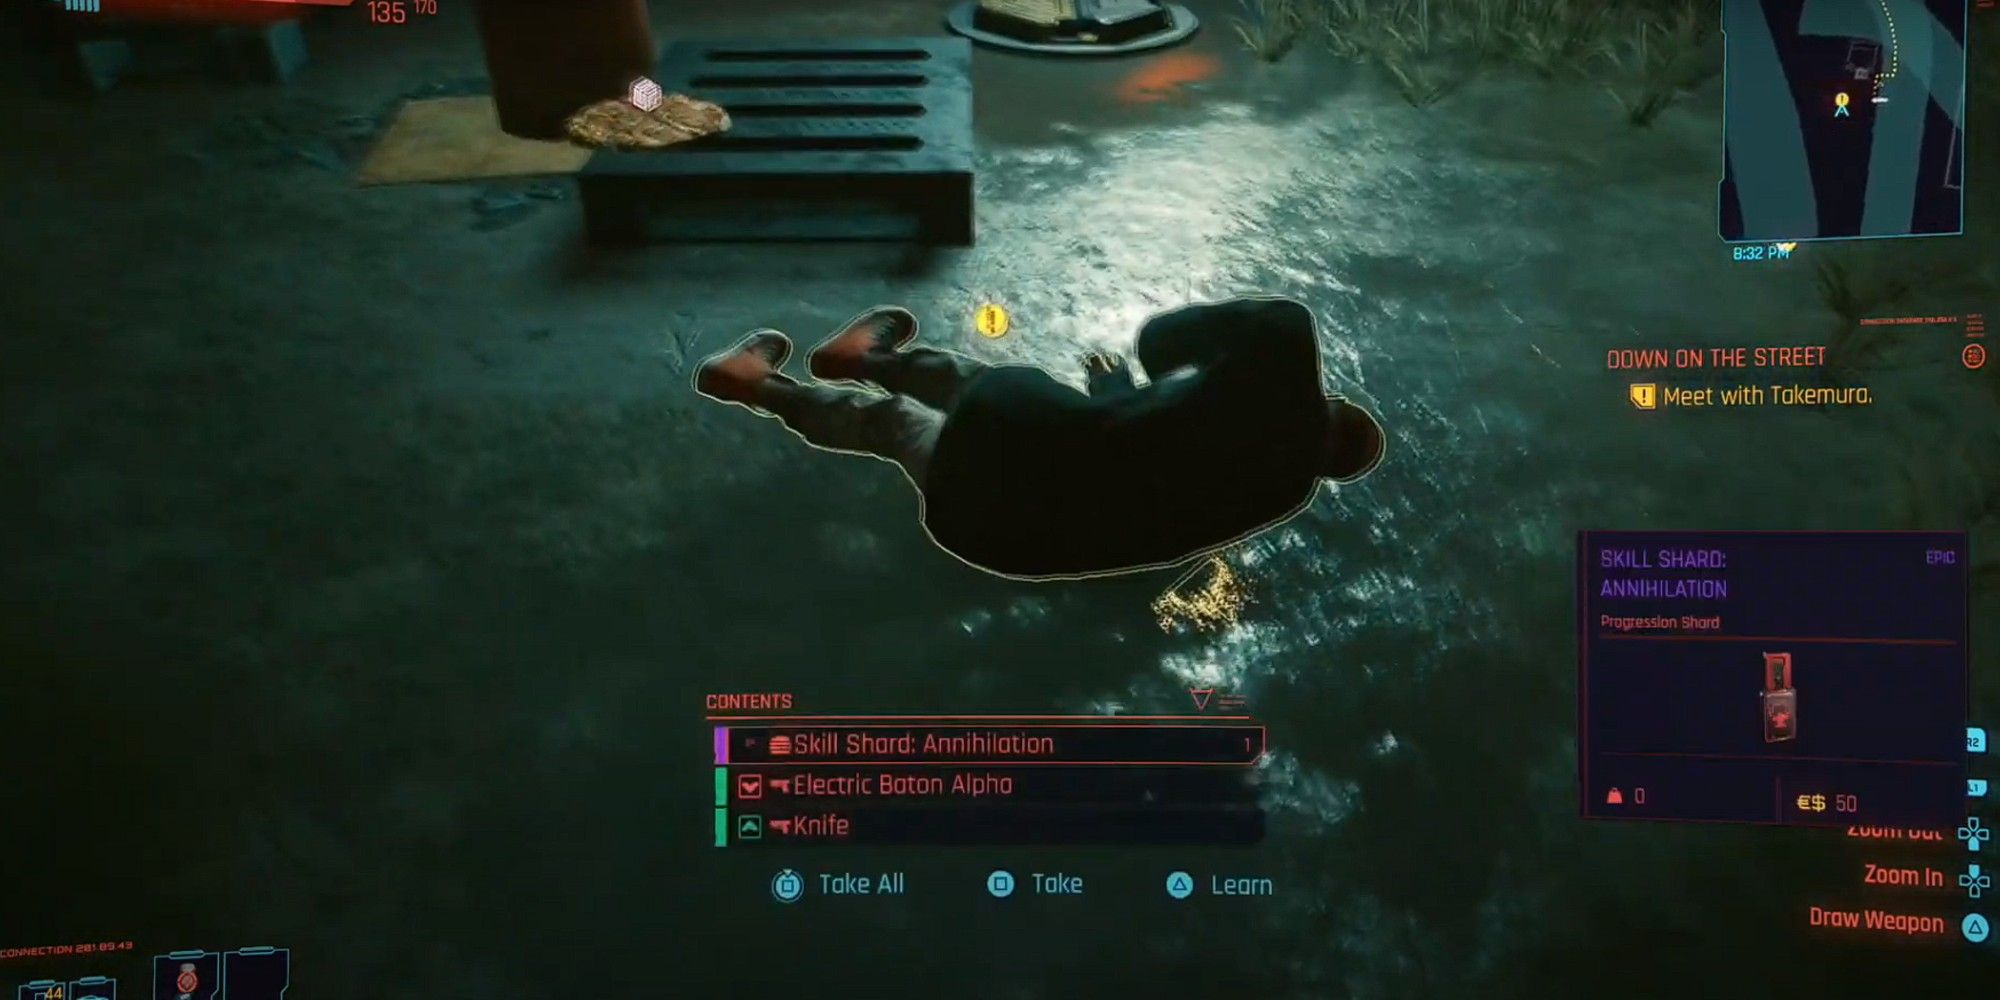 A player finds a Hidden Gem and some other loot on the body of a man in the Homeless Camp in Kabuki in Cyberpunk 2077